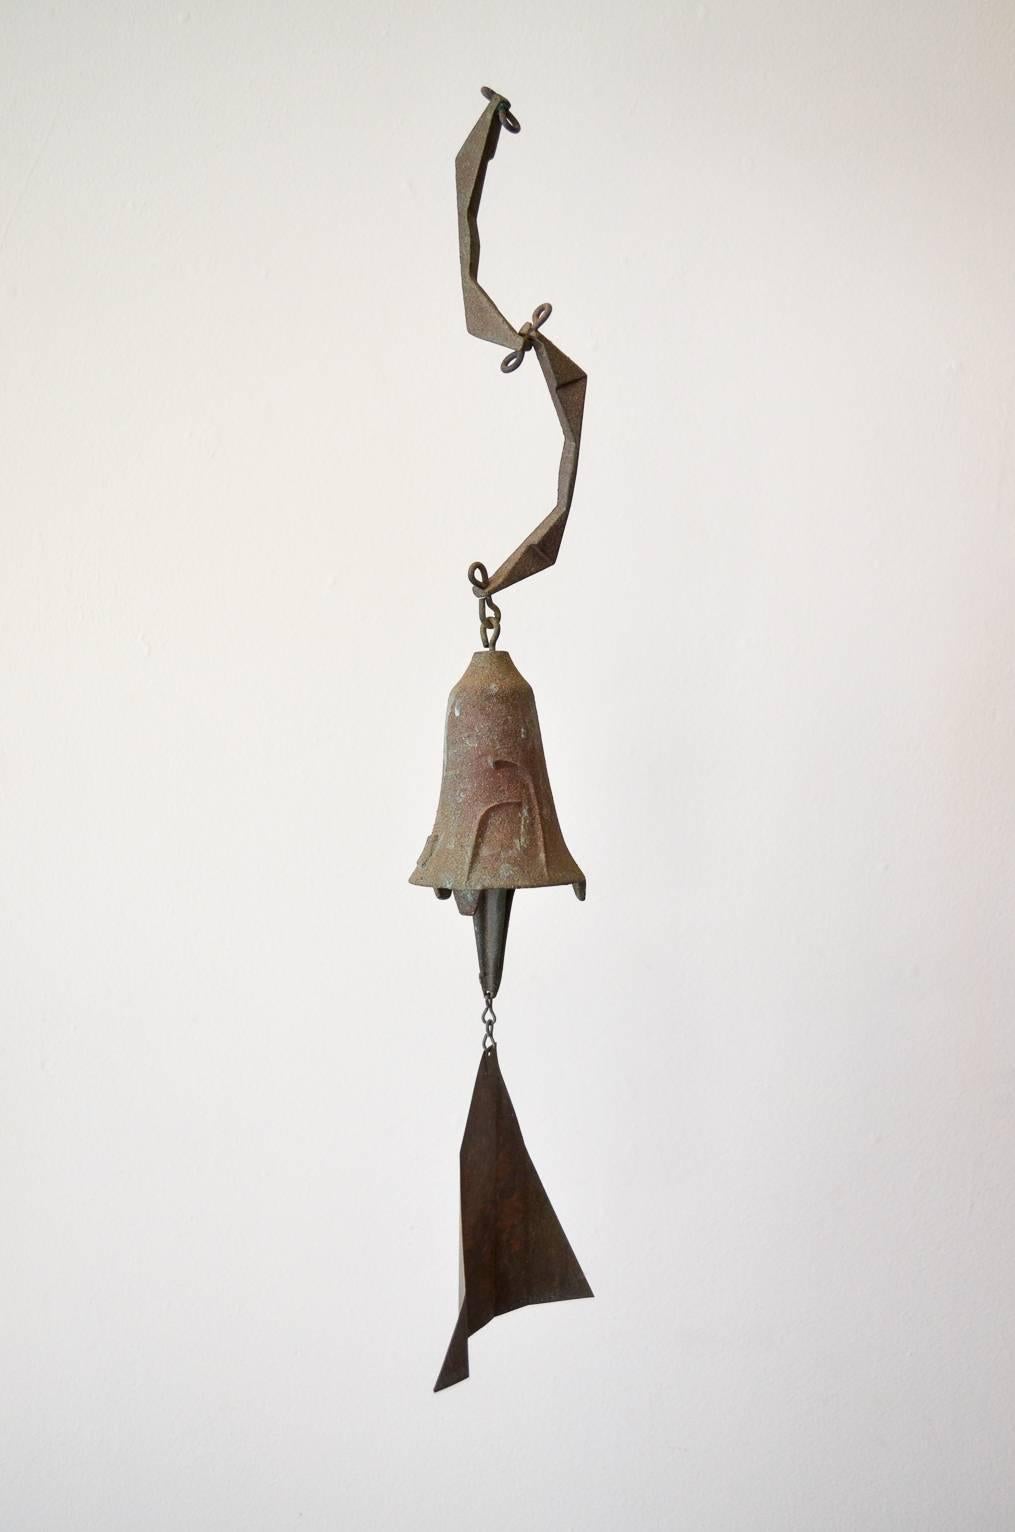 Early Paolo Soleri cast bronze wind bell circa 1960s with original kite and makers mark.

Measures:
Overall H 26